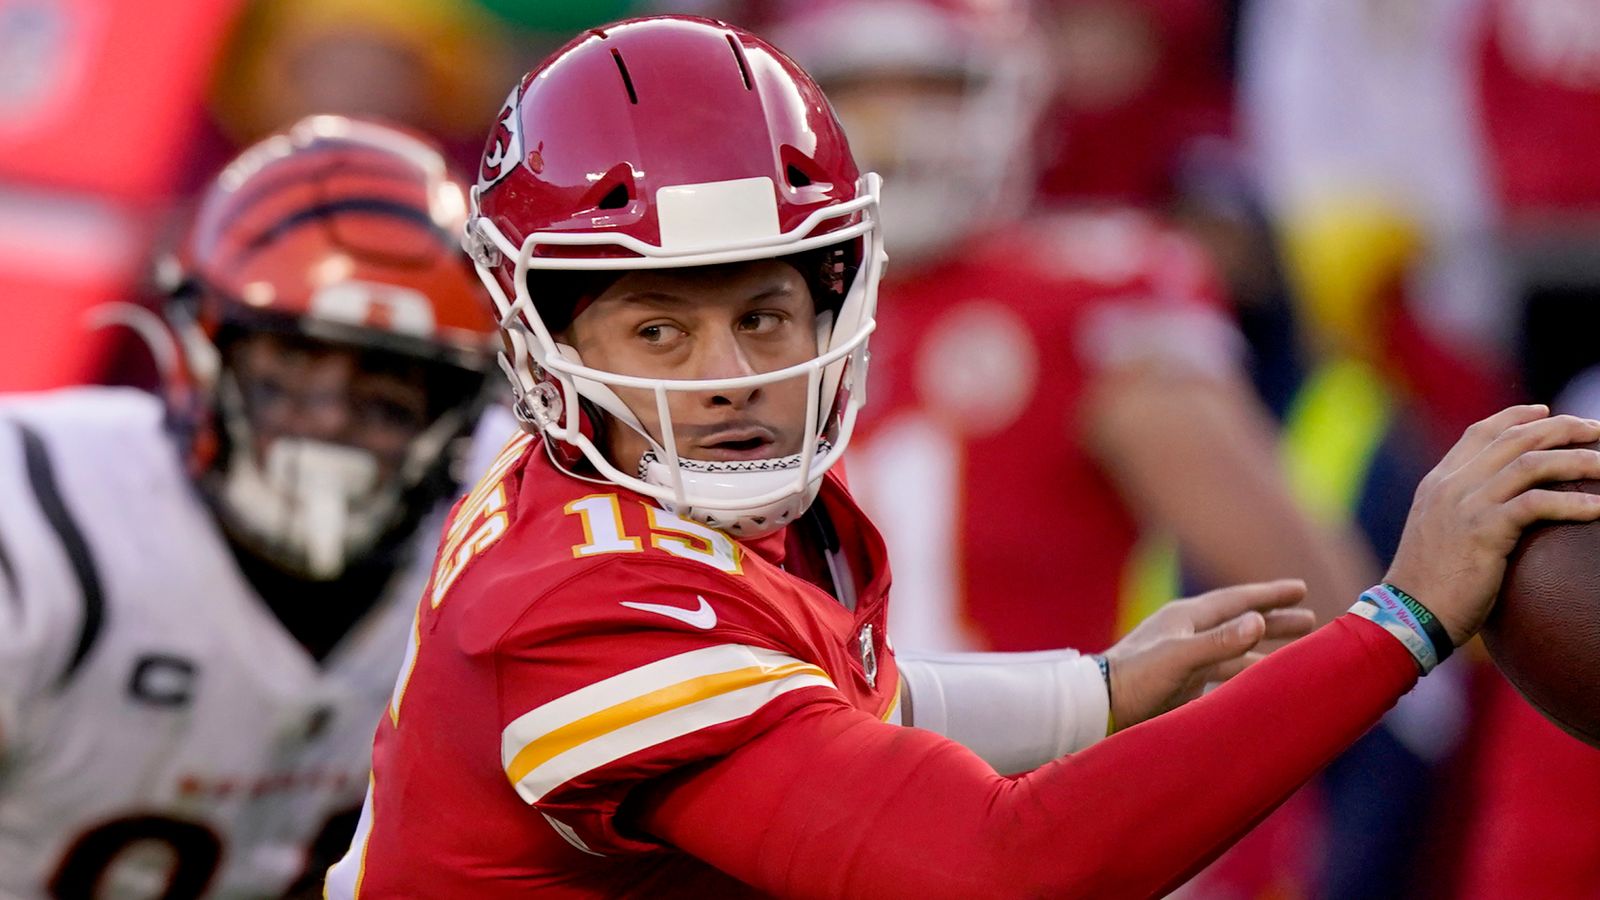 Canaries honoring Pat Mahomes, 'most important signing in team